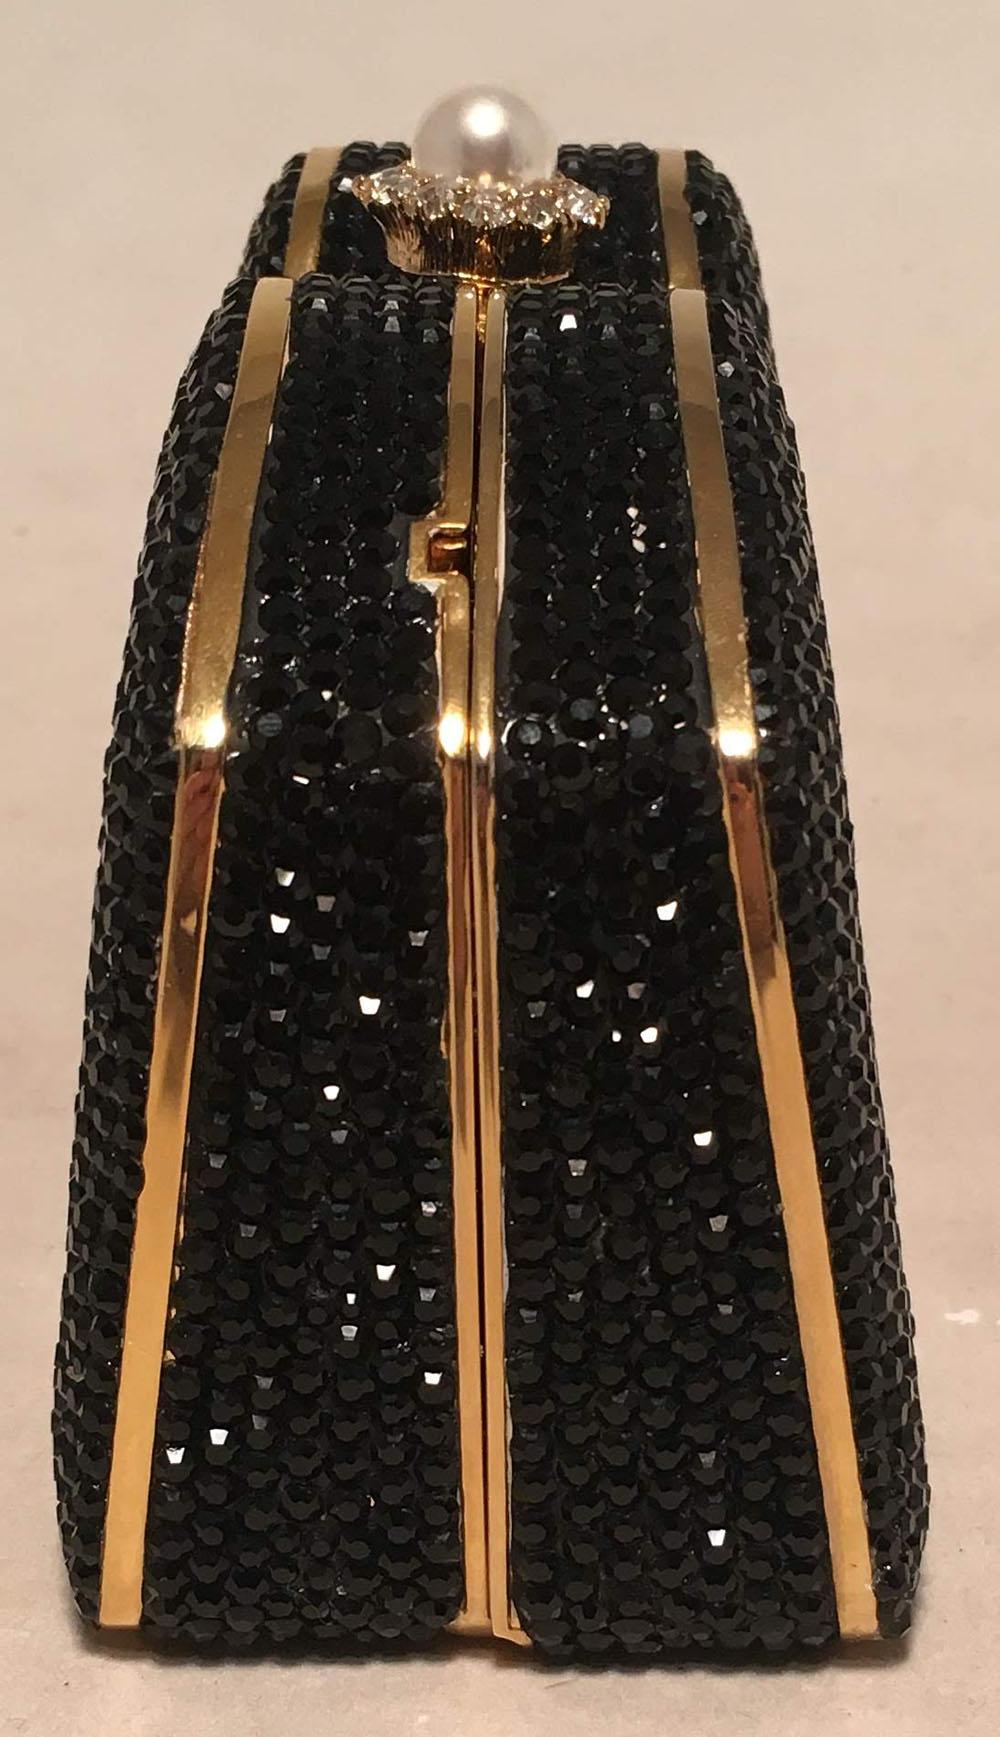 BEAUTIFUL Judith Leiber Black Swarovski Crystal Minaudiere Evening Bag Clutch in excellent condition. Black swarovski crystal exterior trimmed with gold hardware and pearl top push button closure. Gold leather lined interior that holds a gold chain